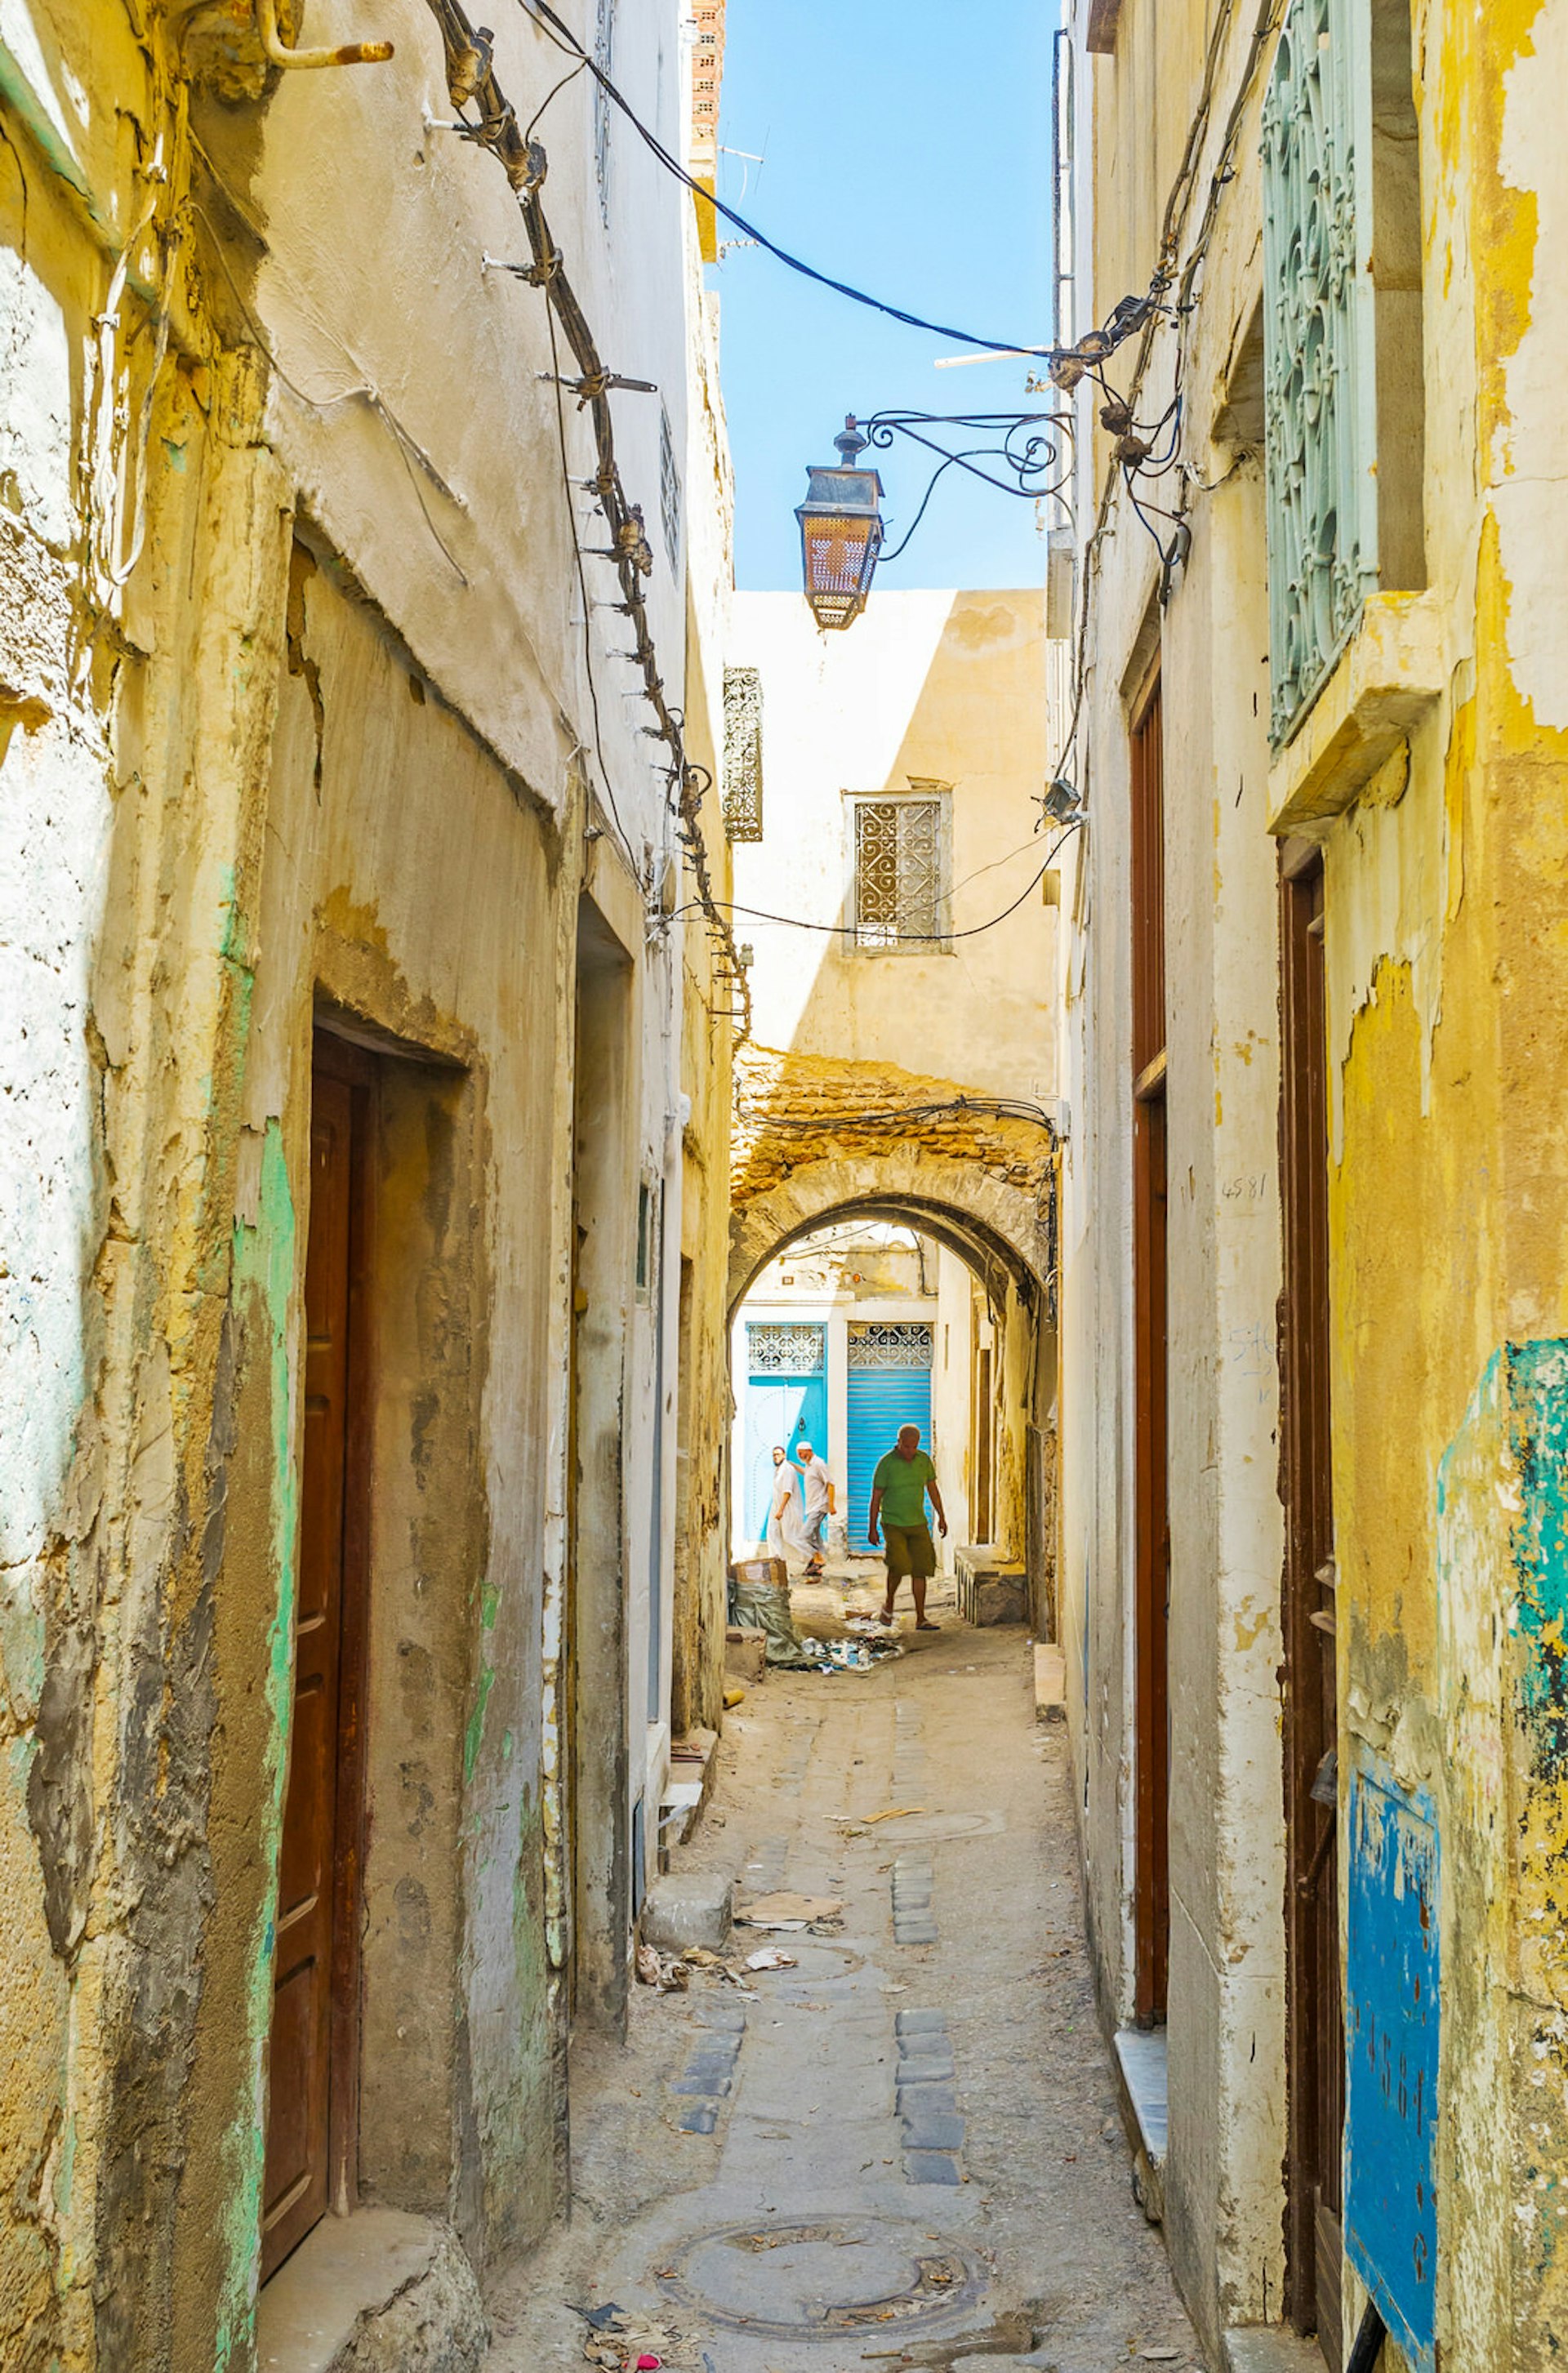 Walking the old narrow streets of medina in Sfax, Tunisia, lined with shabby buildings of local workshops and houses.